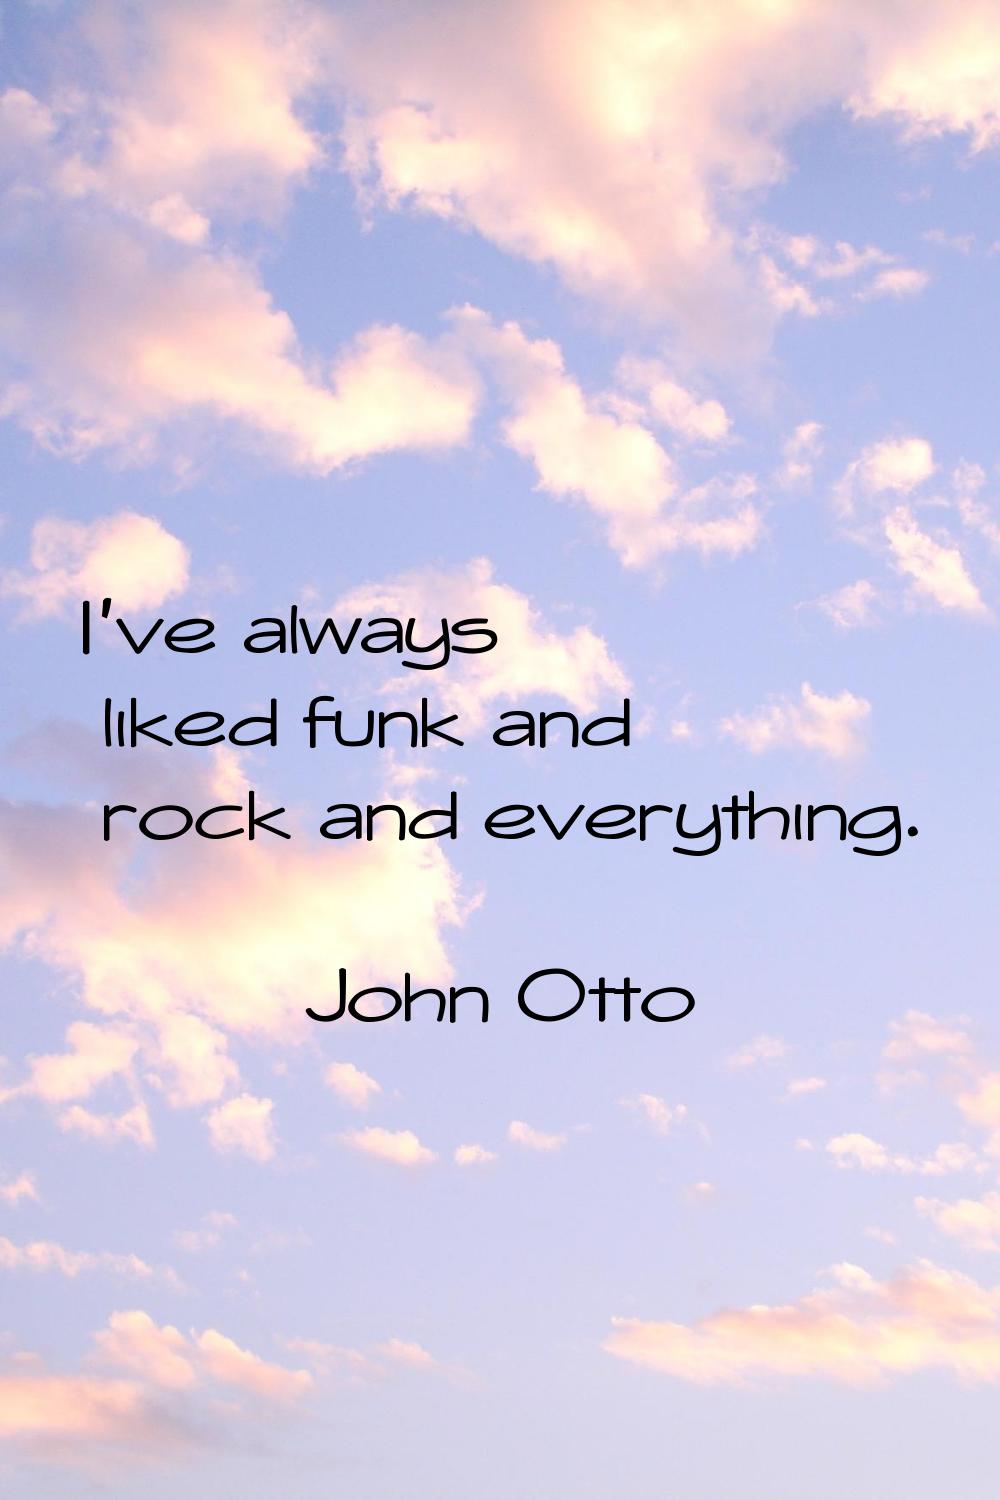 I've always liked funk and rock and everything.